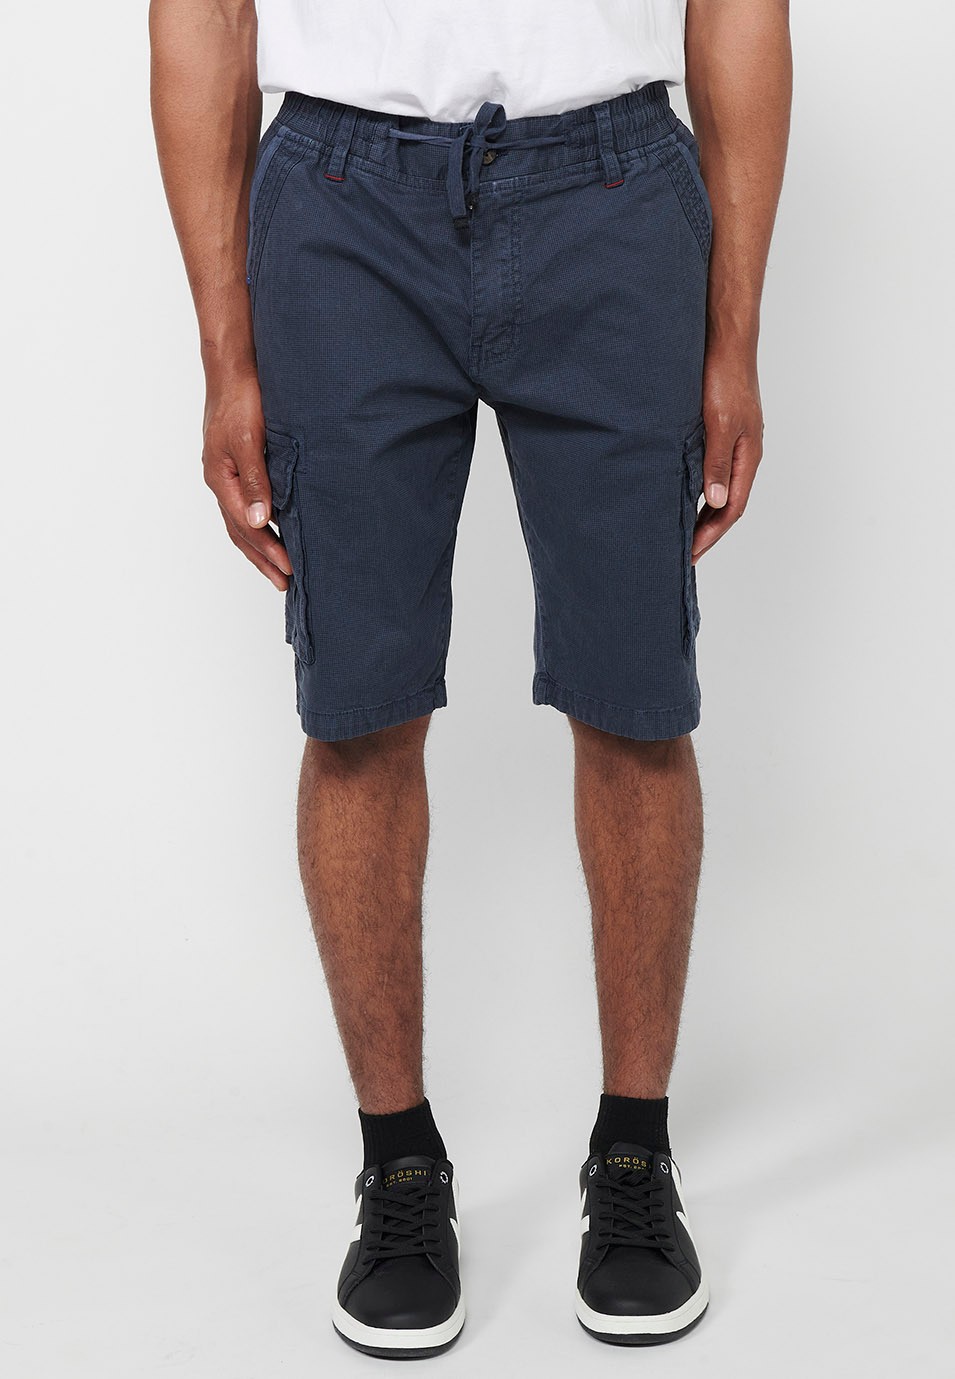 Cargo shorts with front closure with zipper and button and four pockets, two rear pockets with flap with two cargo pockets with flap and adjustable waist with drawstring in Navy Color for Men 1